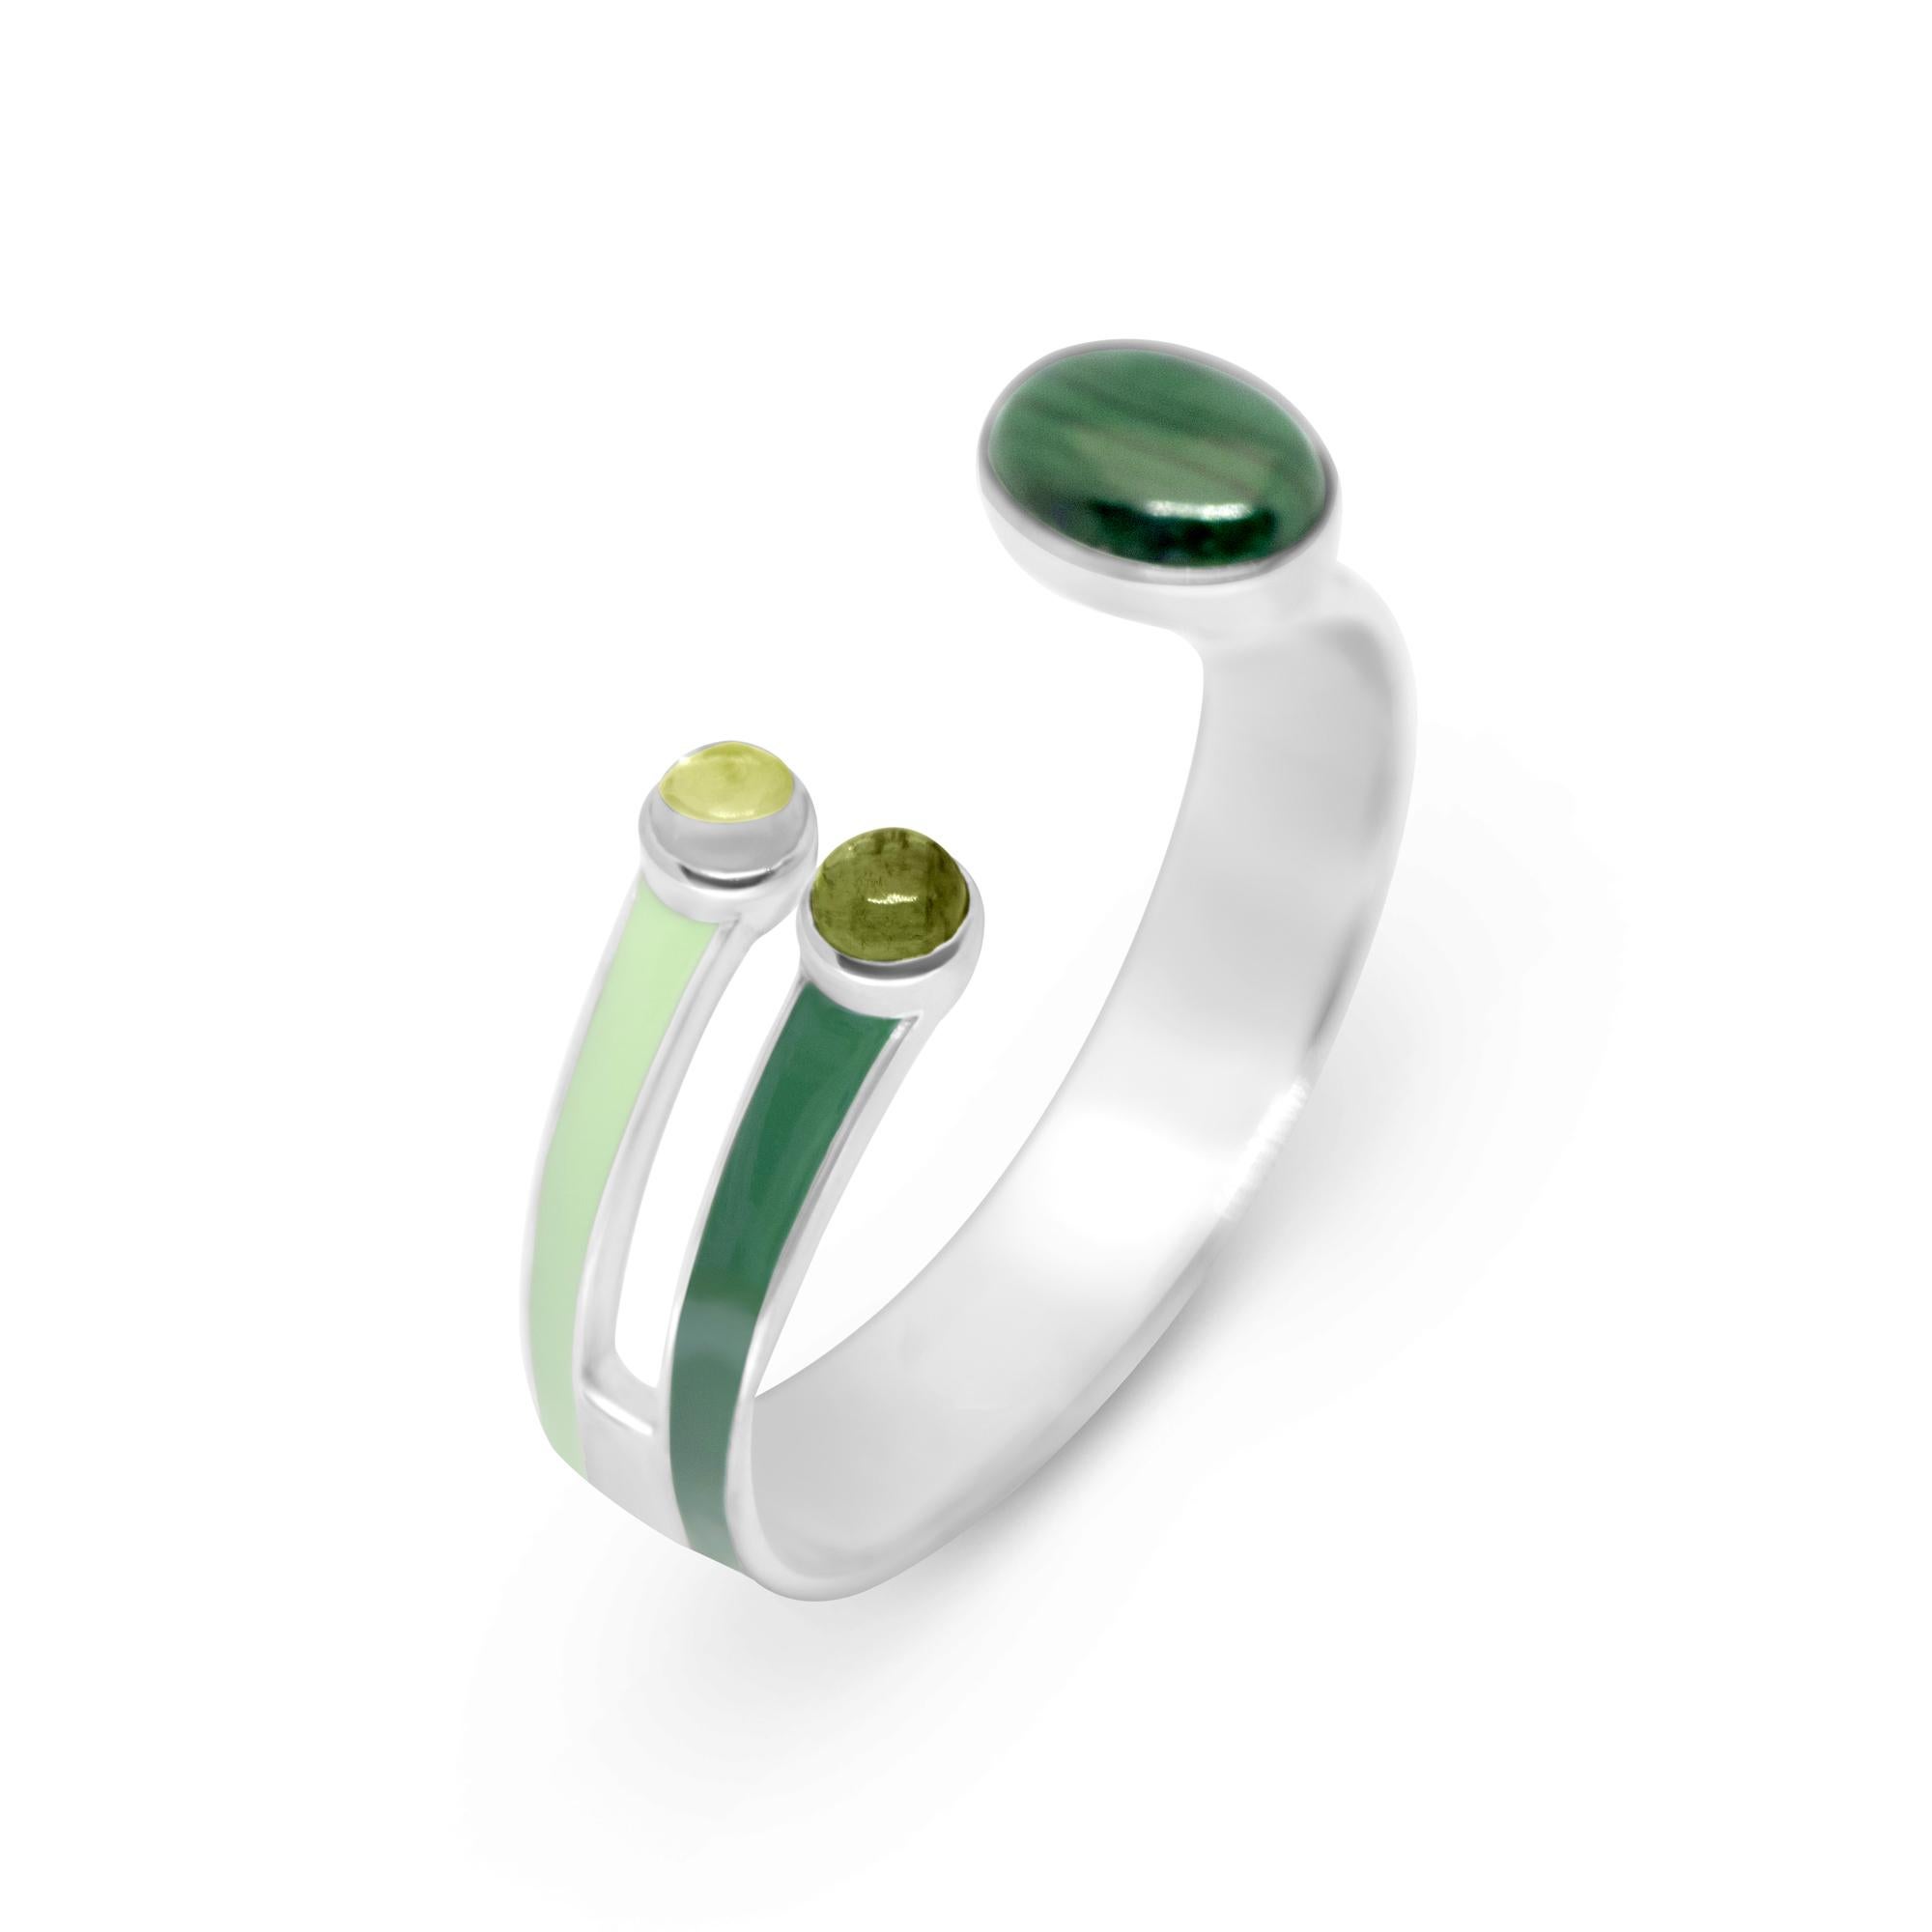 Cuff Bracelet in polished sterling silver and enamel, set with green tourmaline, peridot and malachite. The design is inspired by the stripe pattern and the color of nature, trees, specifically the Tuscan countryside, the designer's hometown. Green